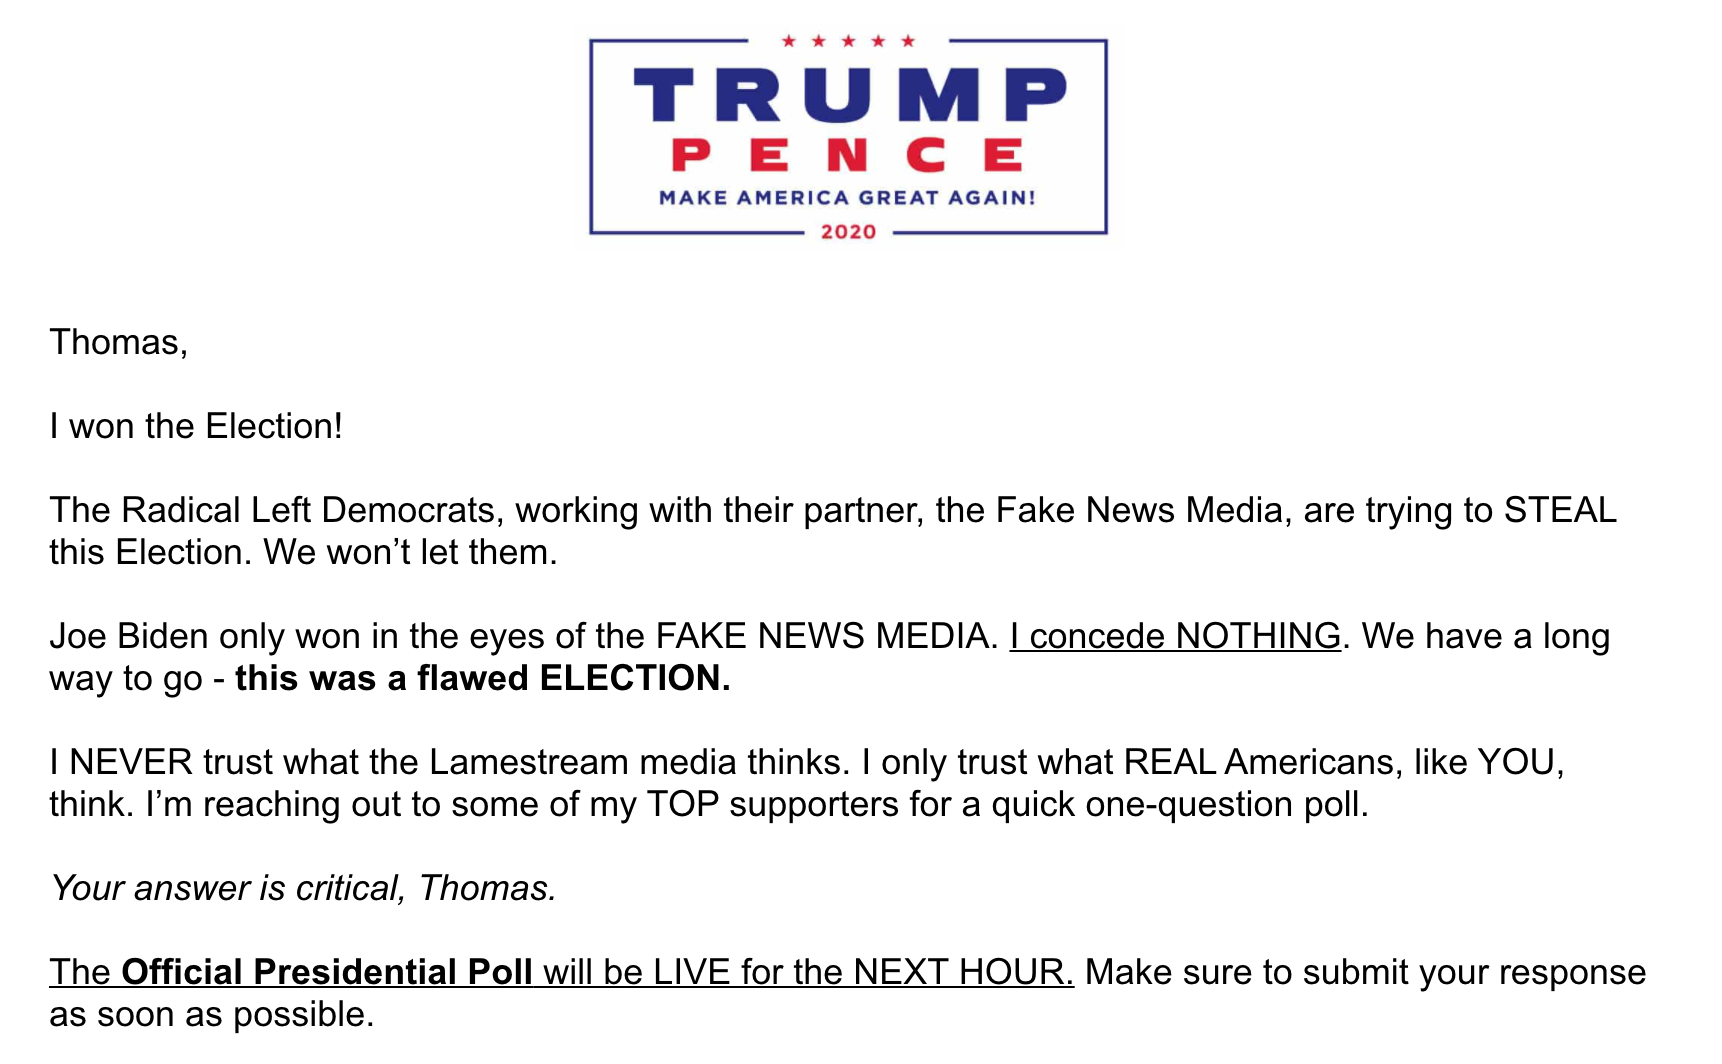 Trump campaign email